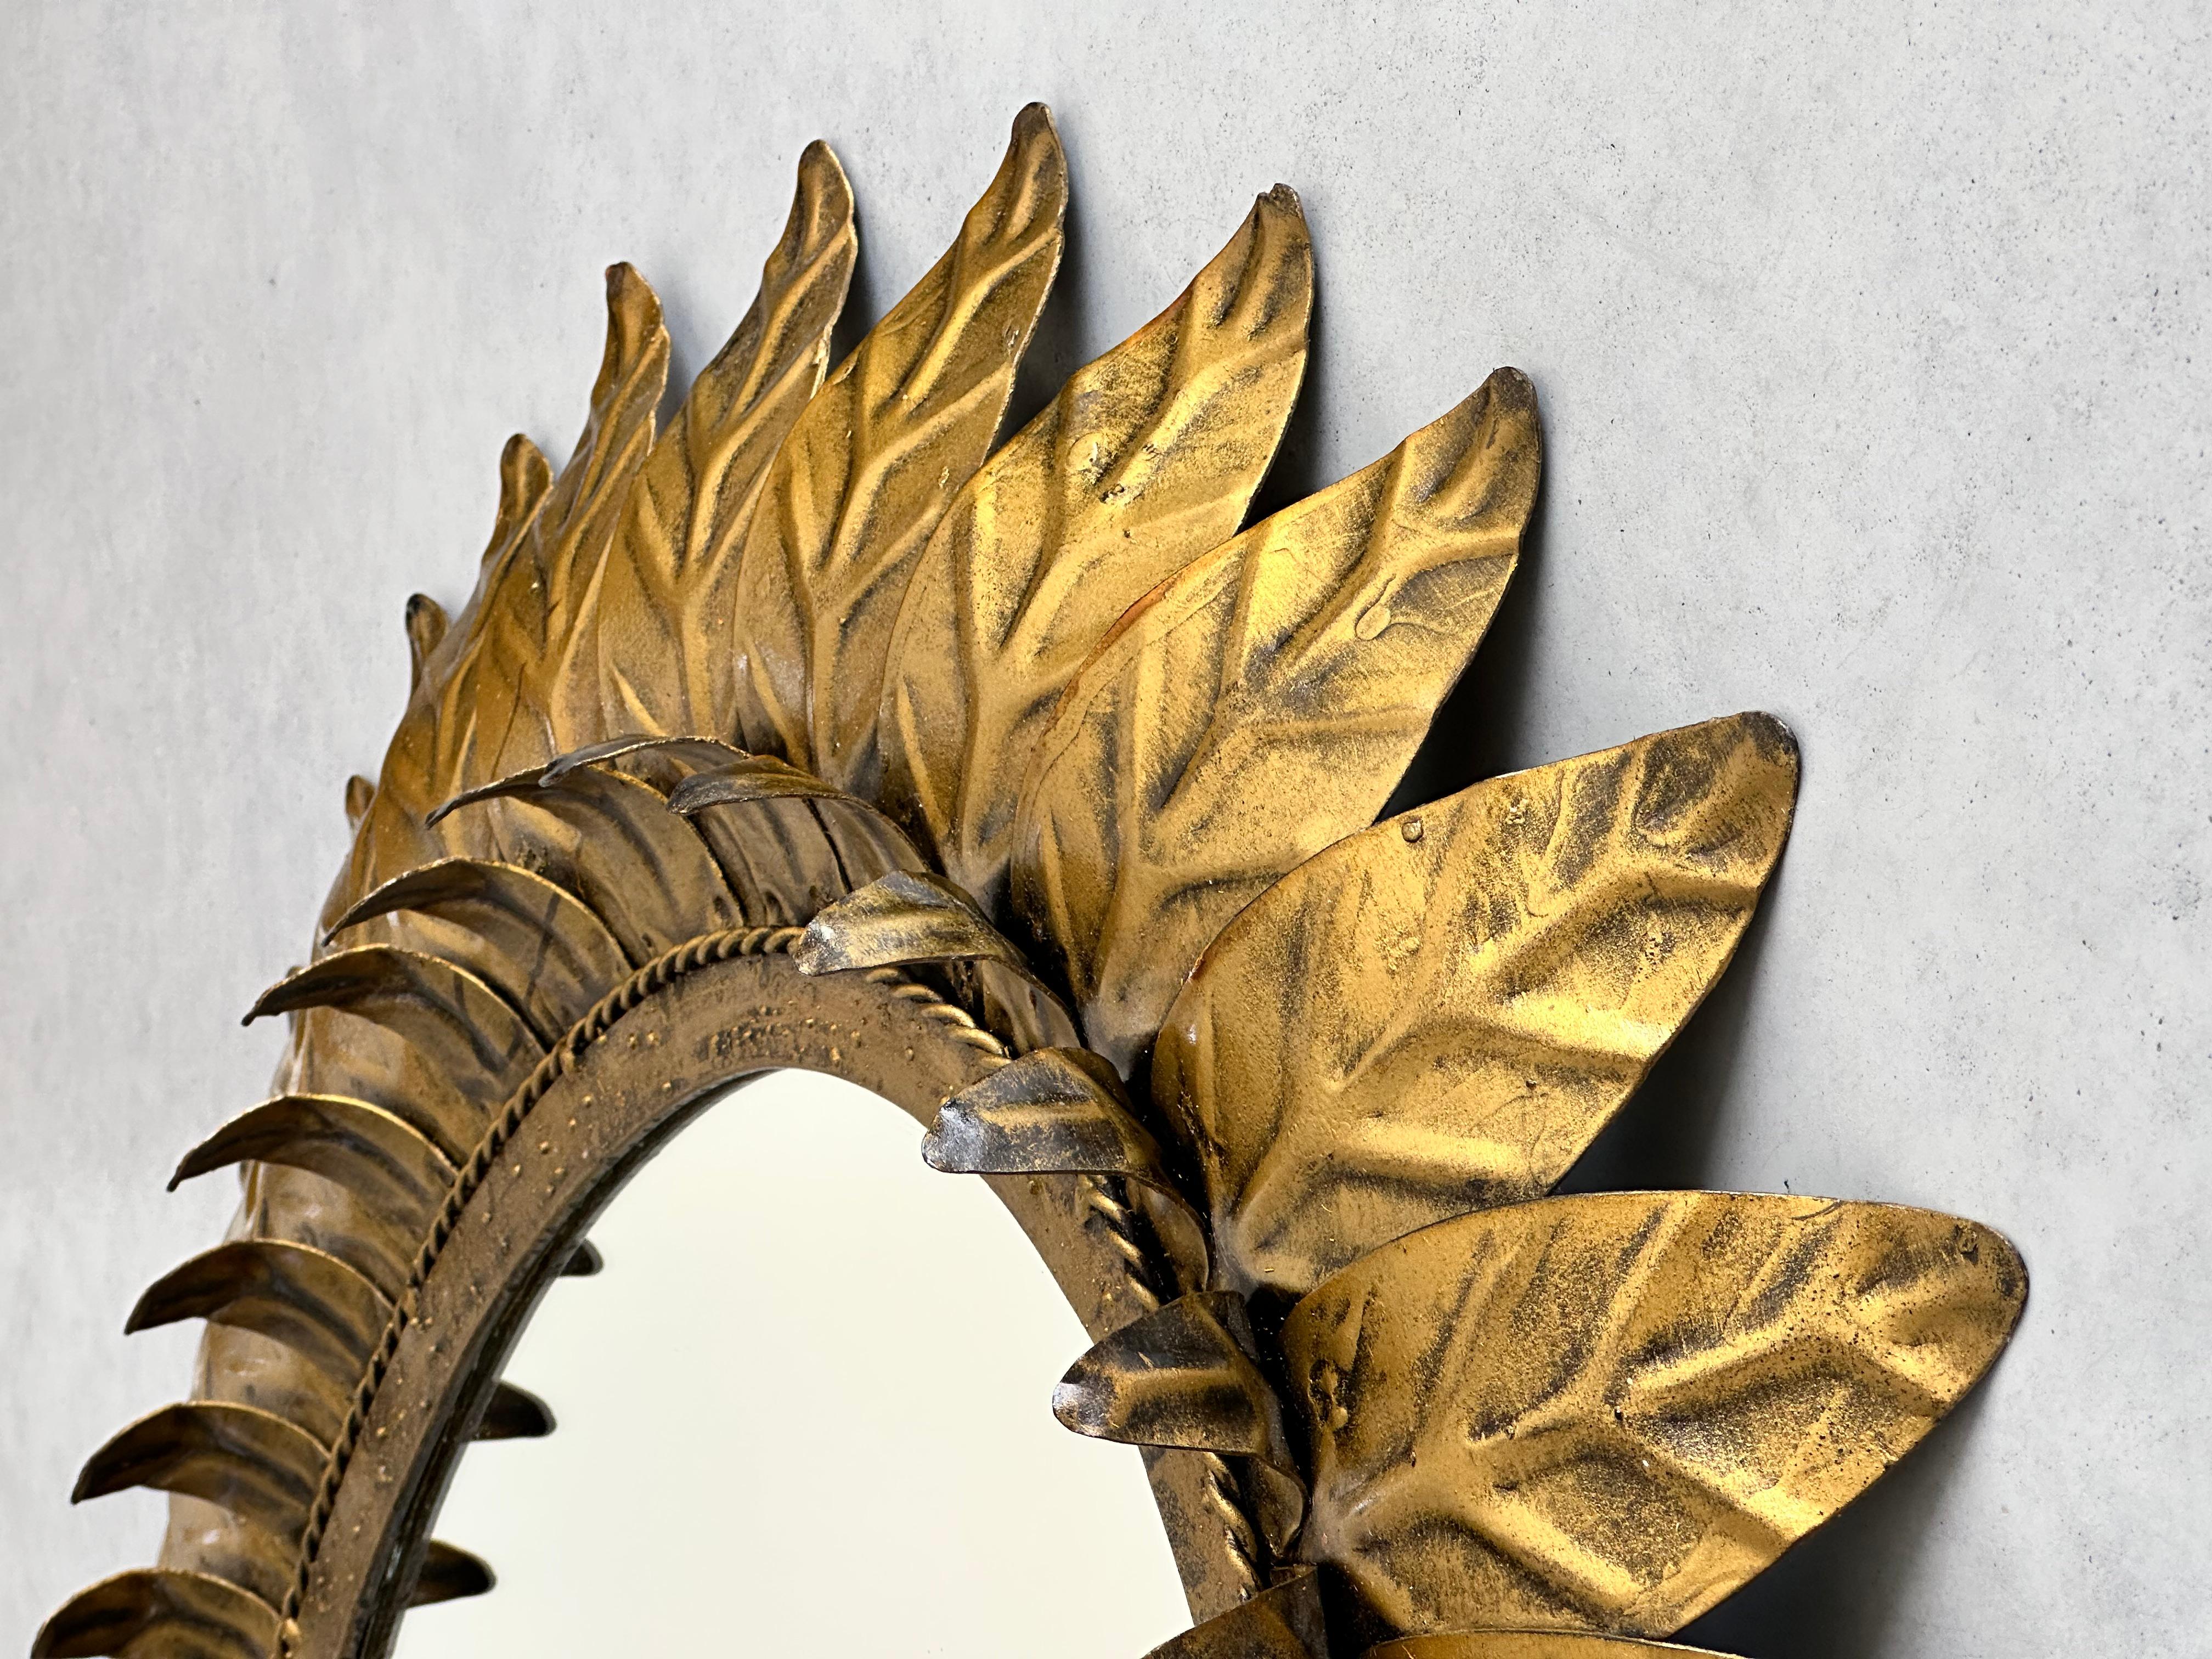 Metalwork Large oval sunburst mirror, framed with gold-colored metal leaves, Spain 1960 For Sale